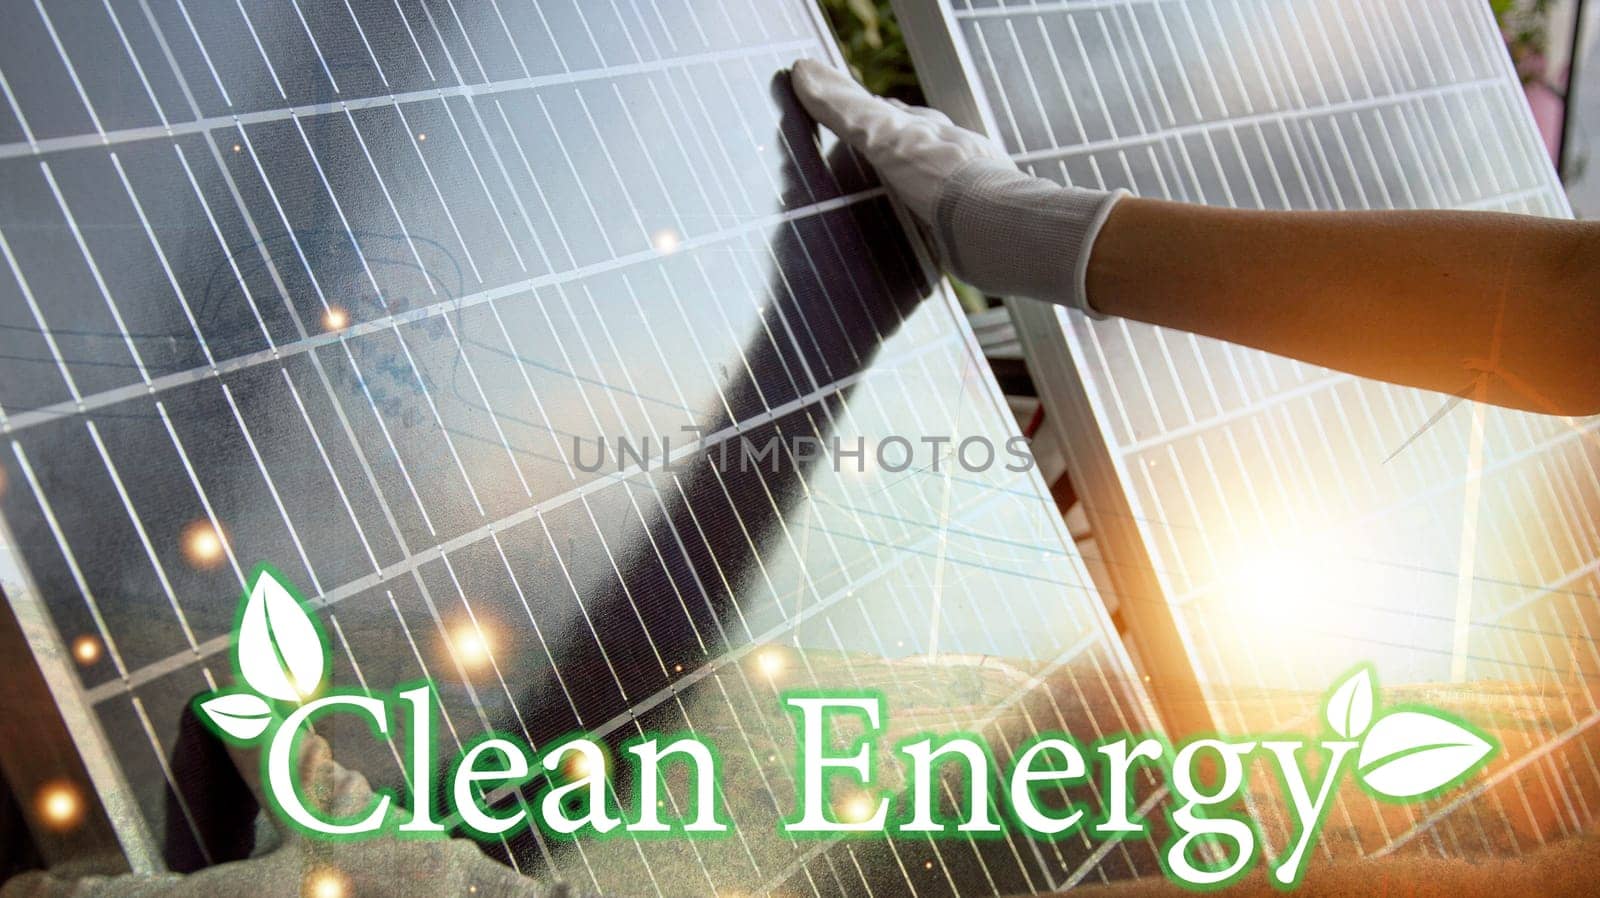 The concept of clean energy, solar cells, wind energy, environmentally friendly.